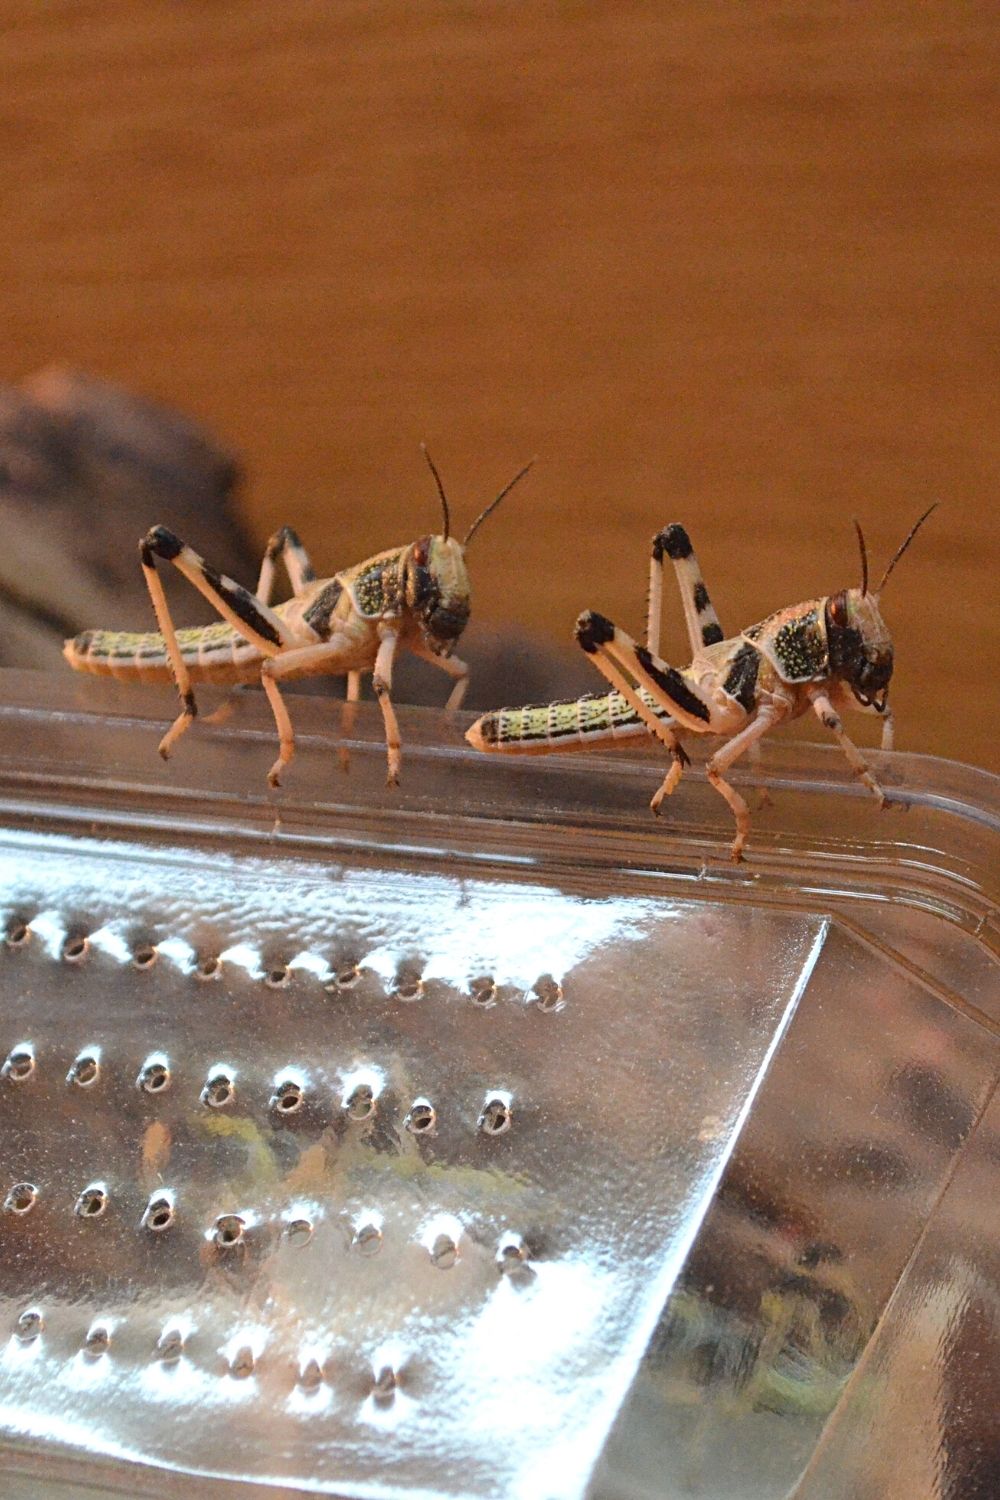 When temperatures drop, crickets enter into their slumber phase, making them look like they're dead